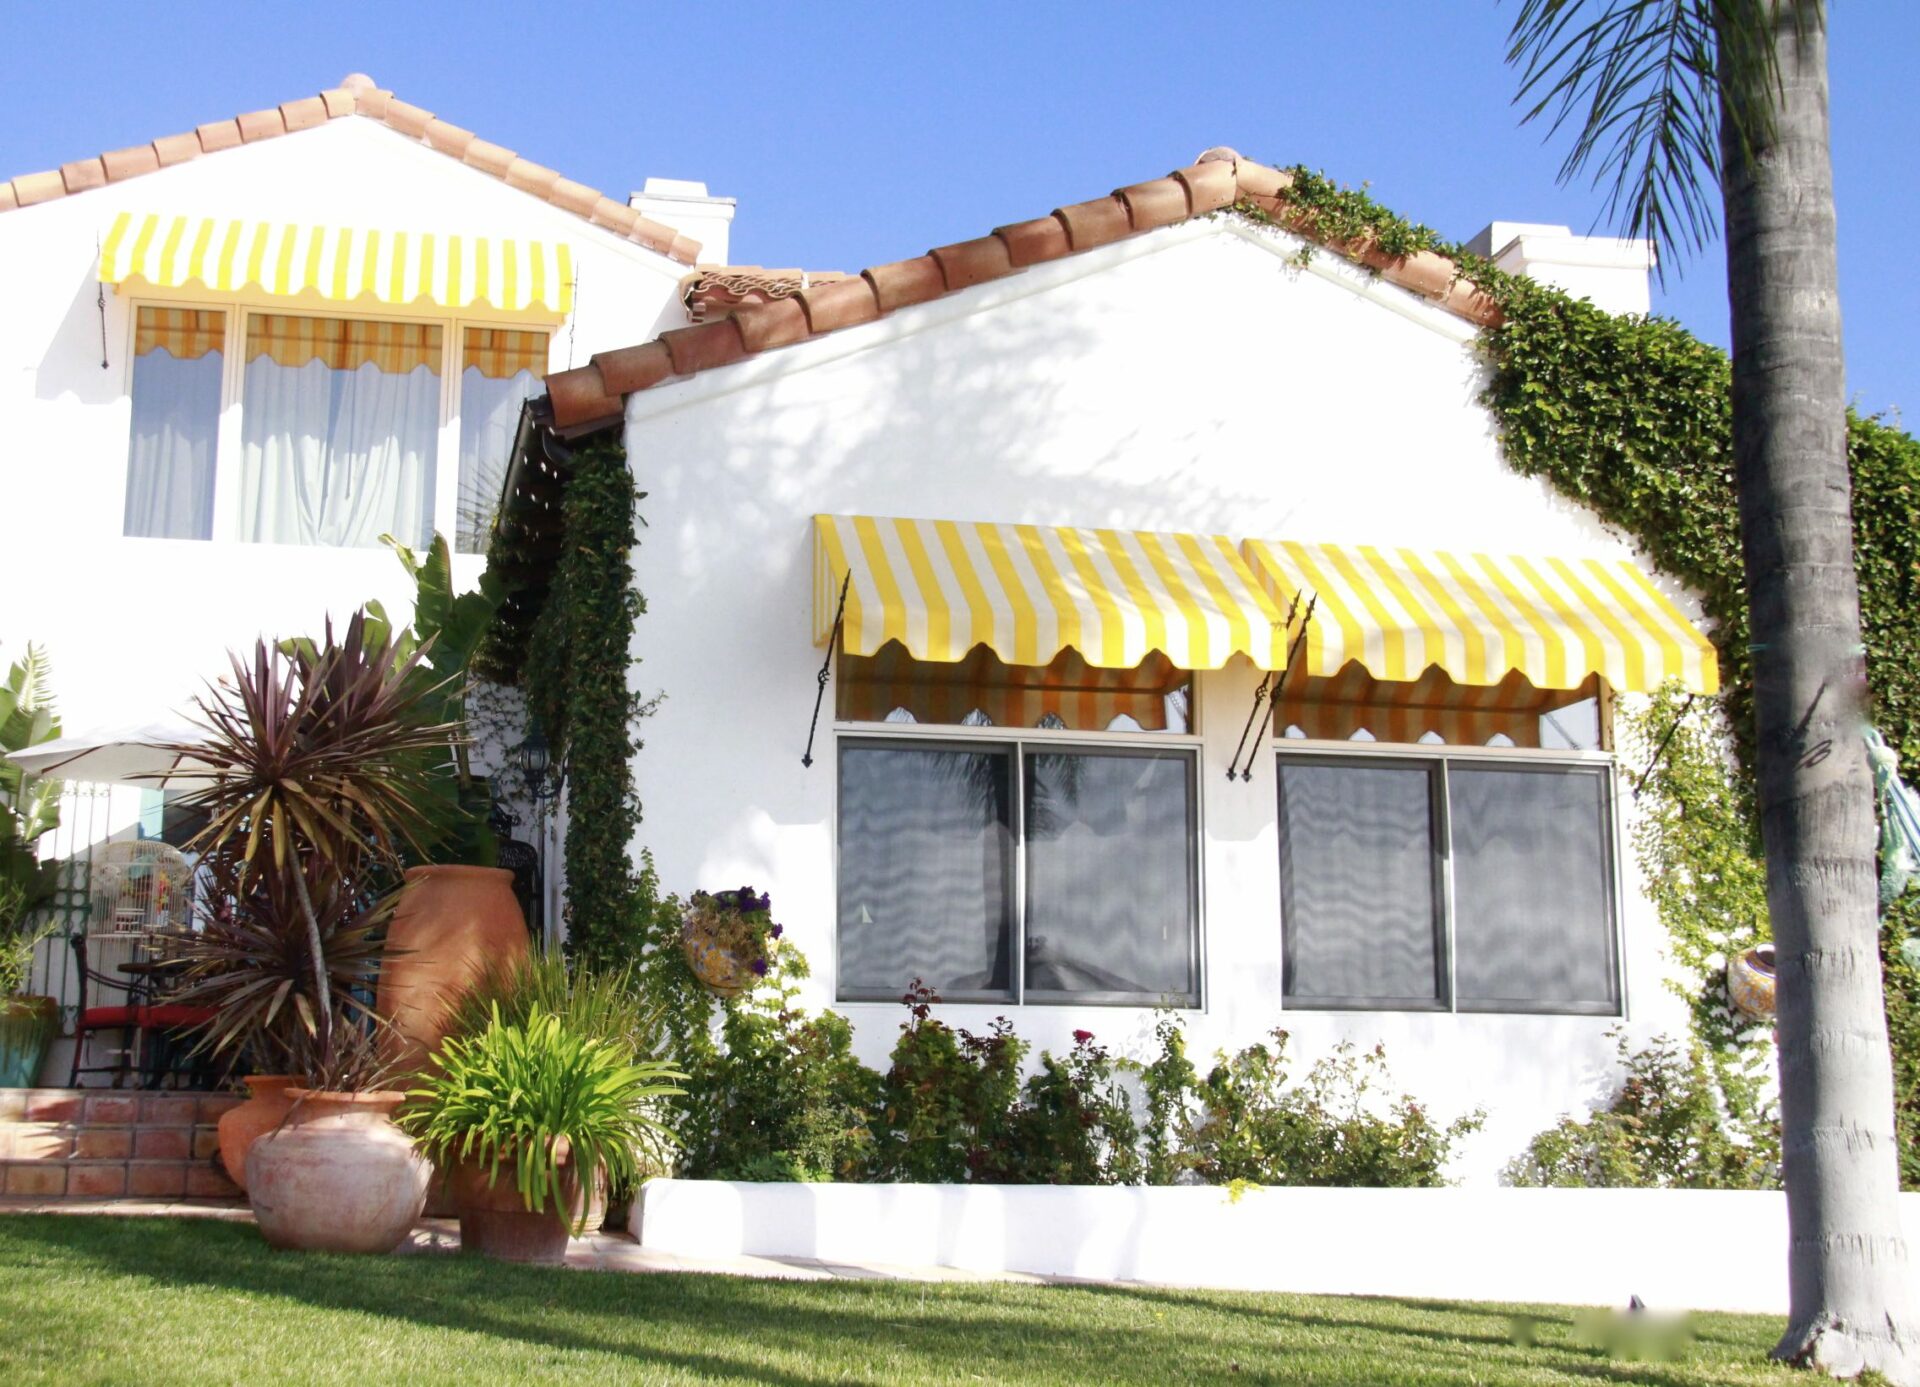 Home with yellow striped spear awnings